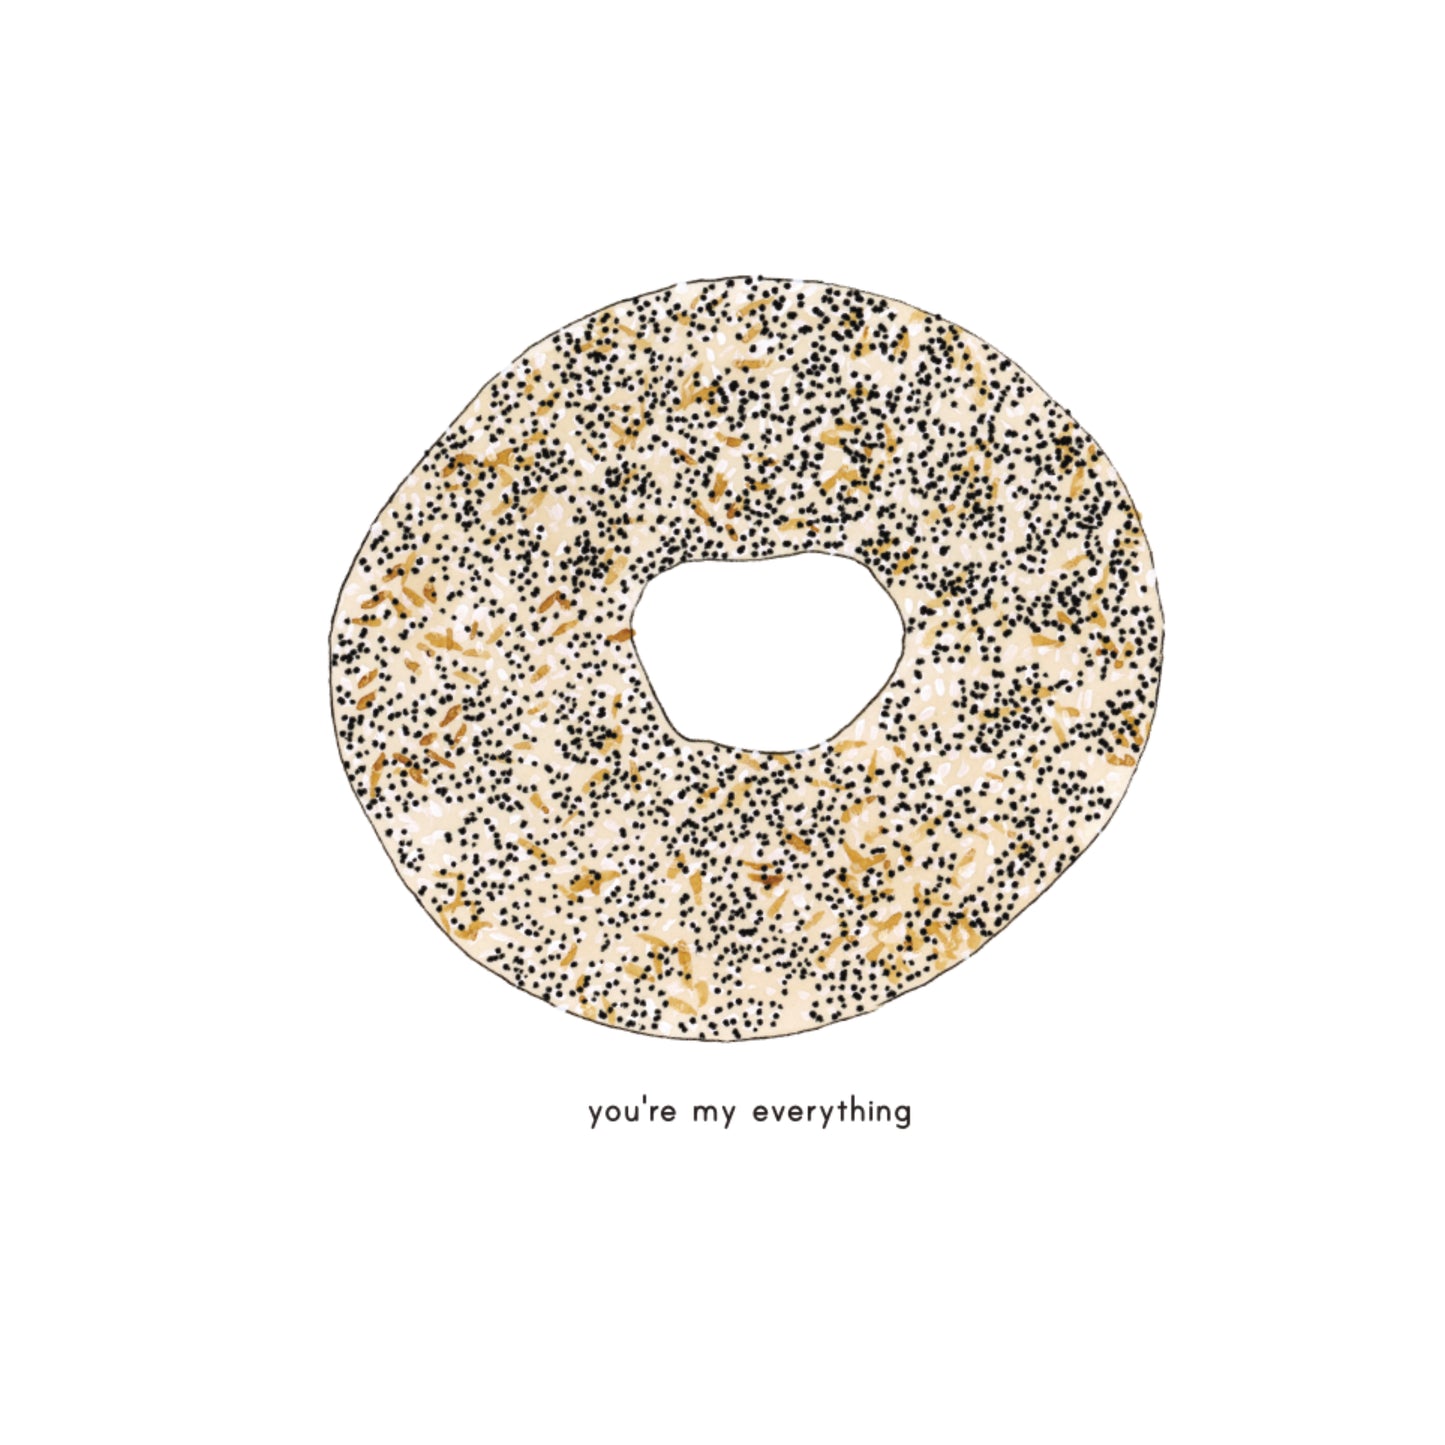 Everything Bagel Card - "You're My Everything"